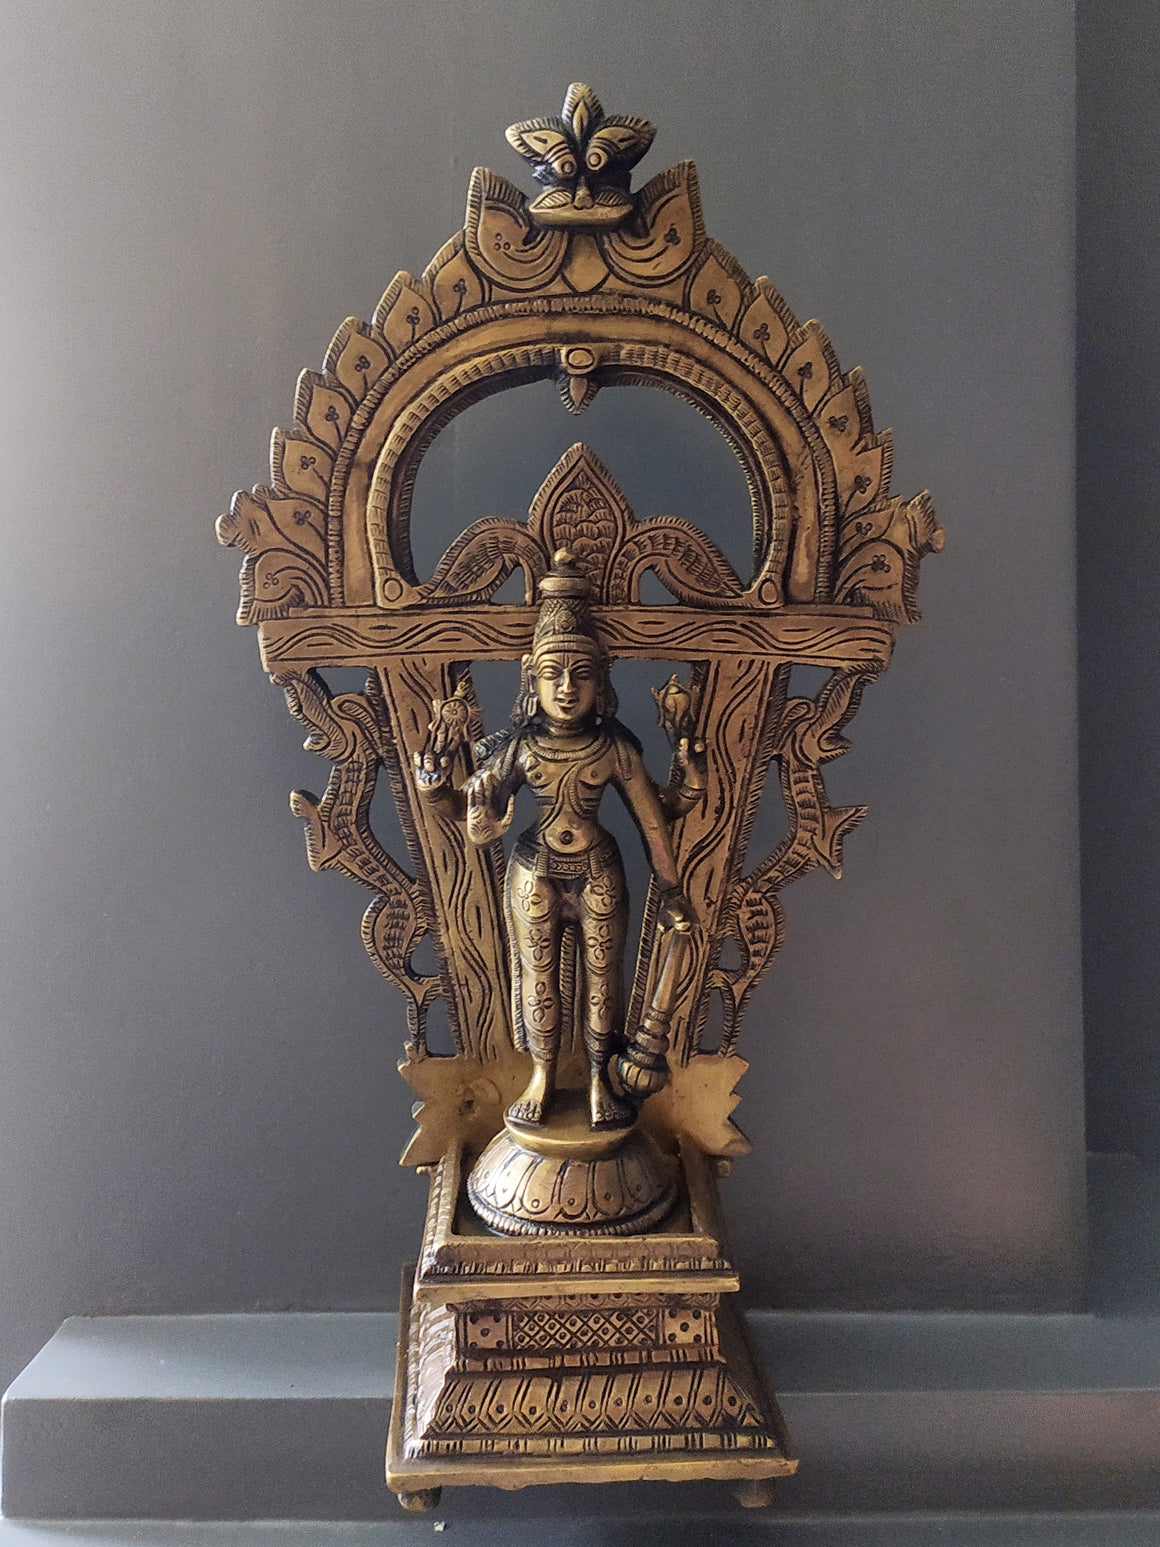 Majestic Brass Sculpture Of Lord Vishnu - Protector Of The World. Height 33 cm x Width 18.5 cm